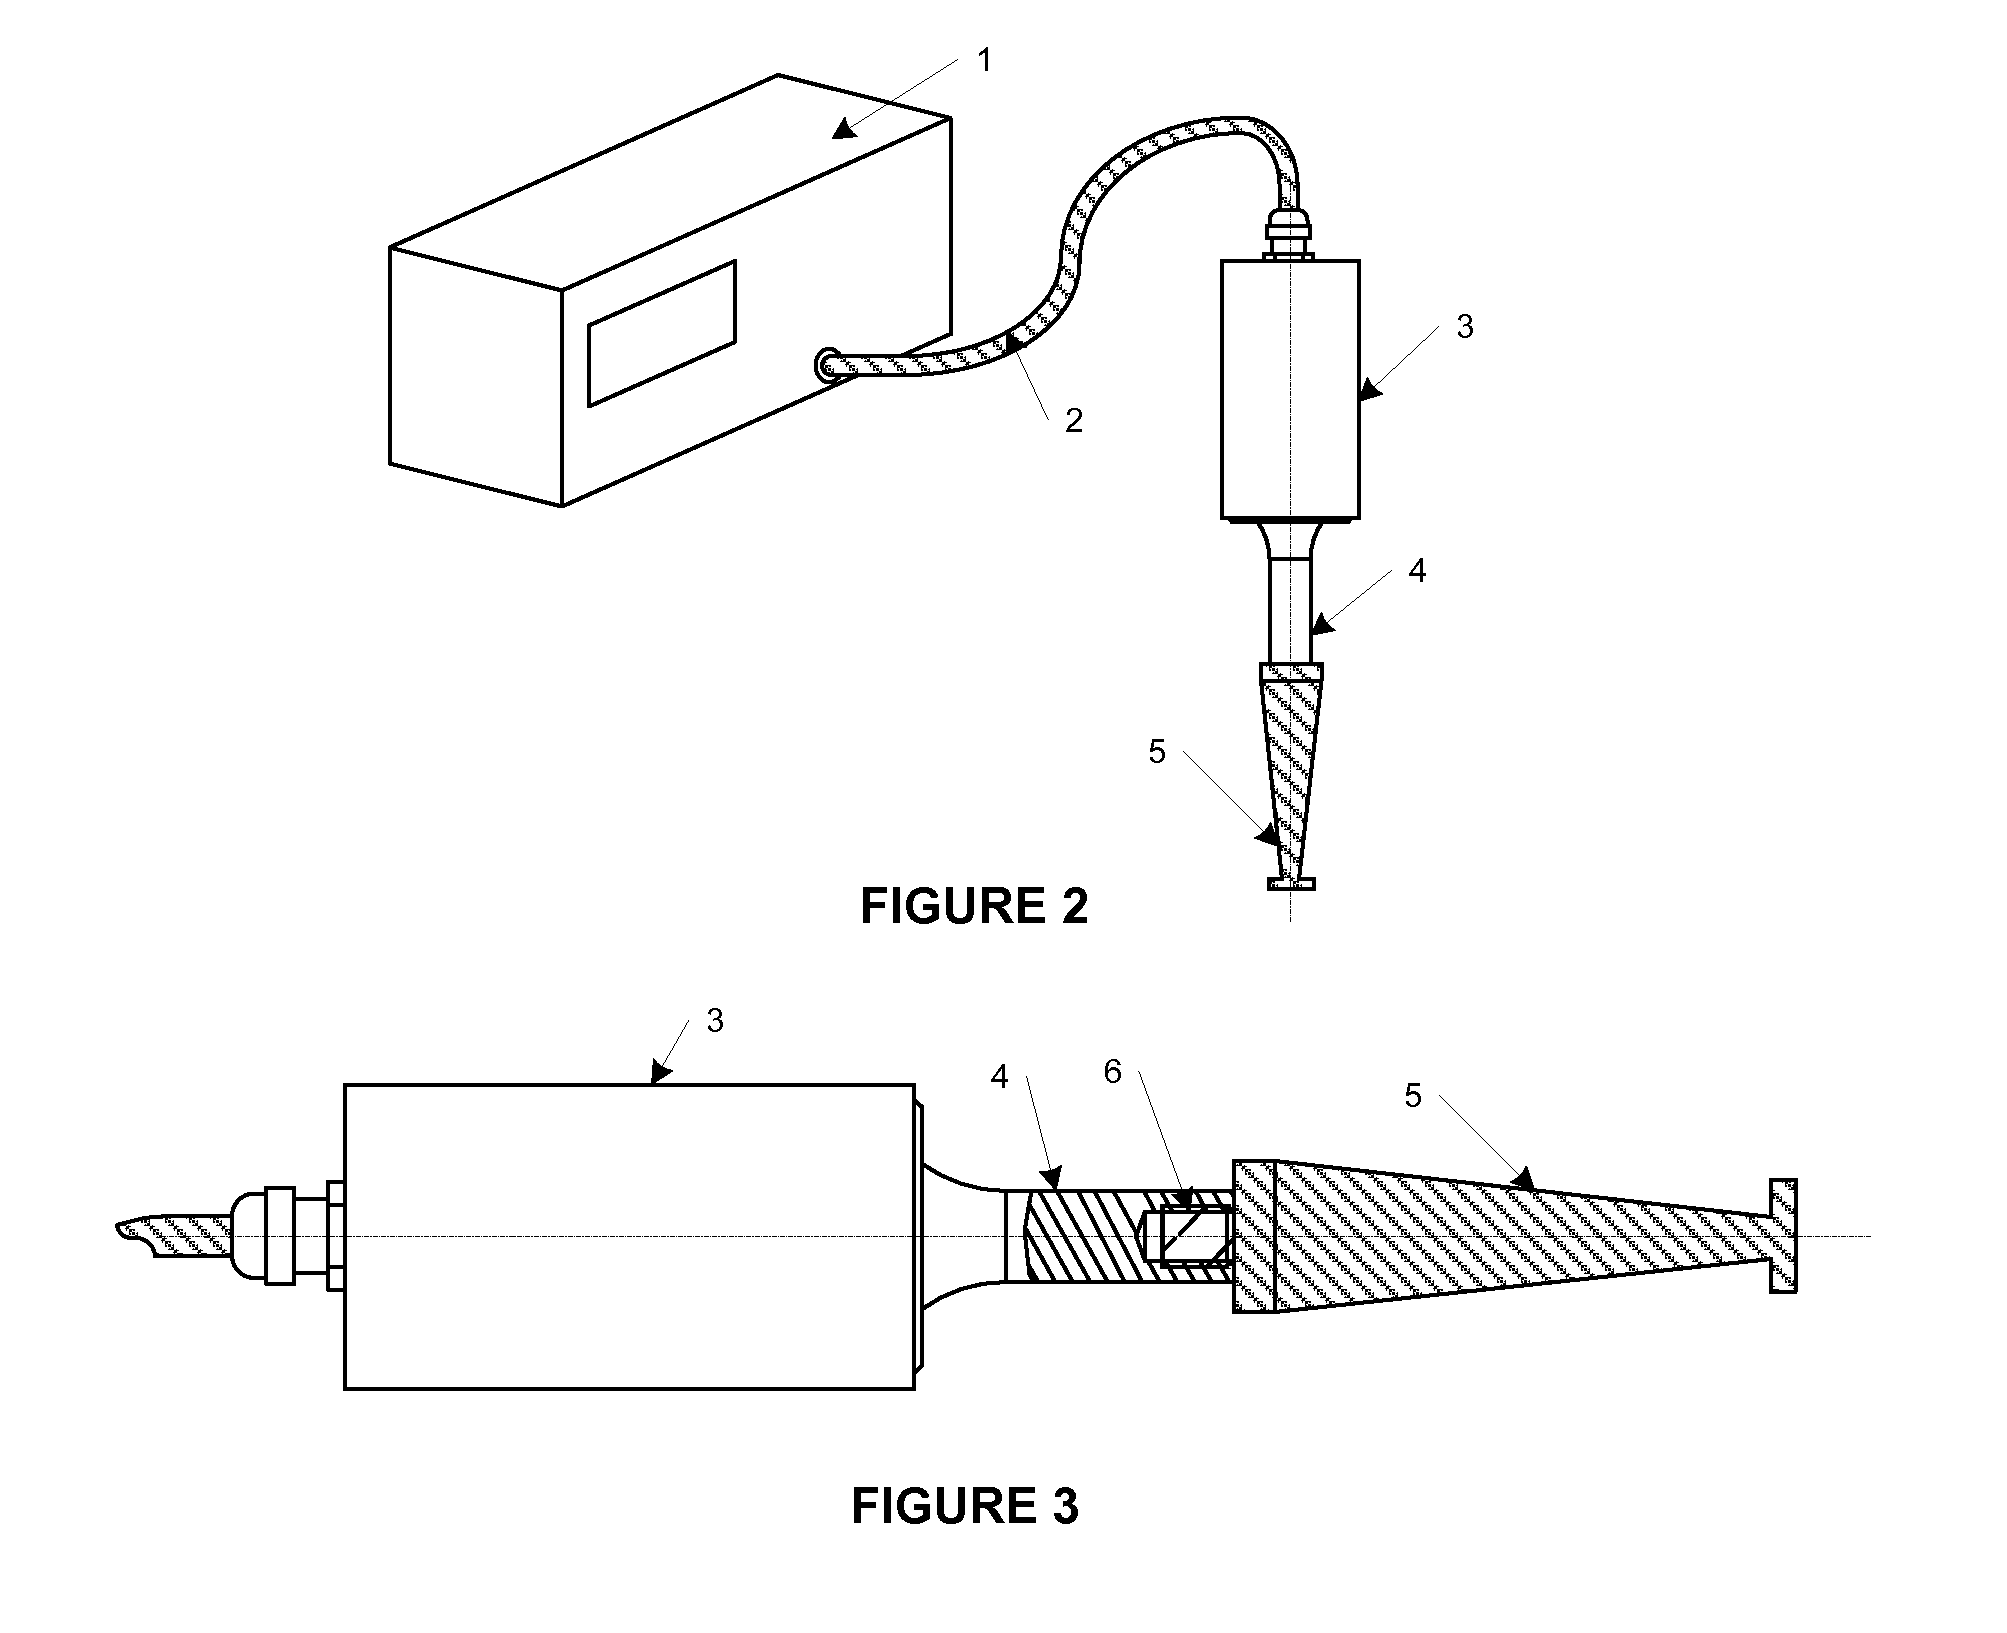 Method and Apparatus for Producing Beverages from Coffee Beans Using Ultrasound Energy